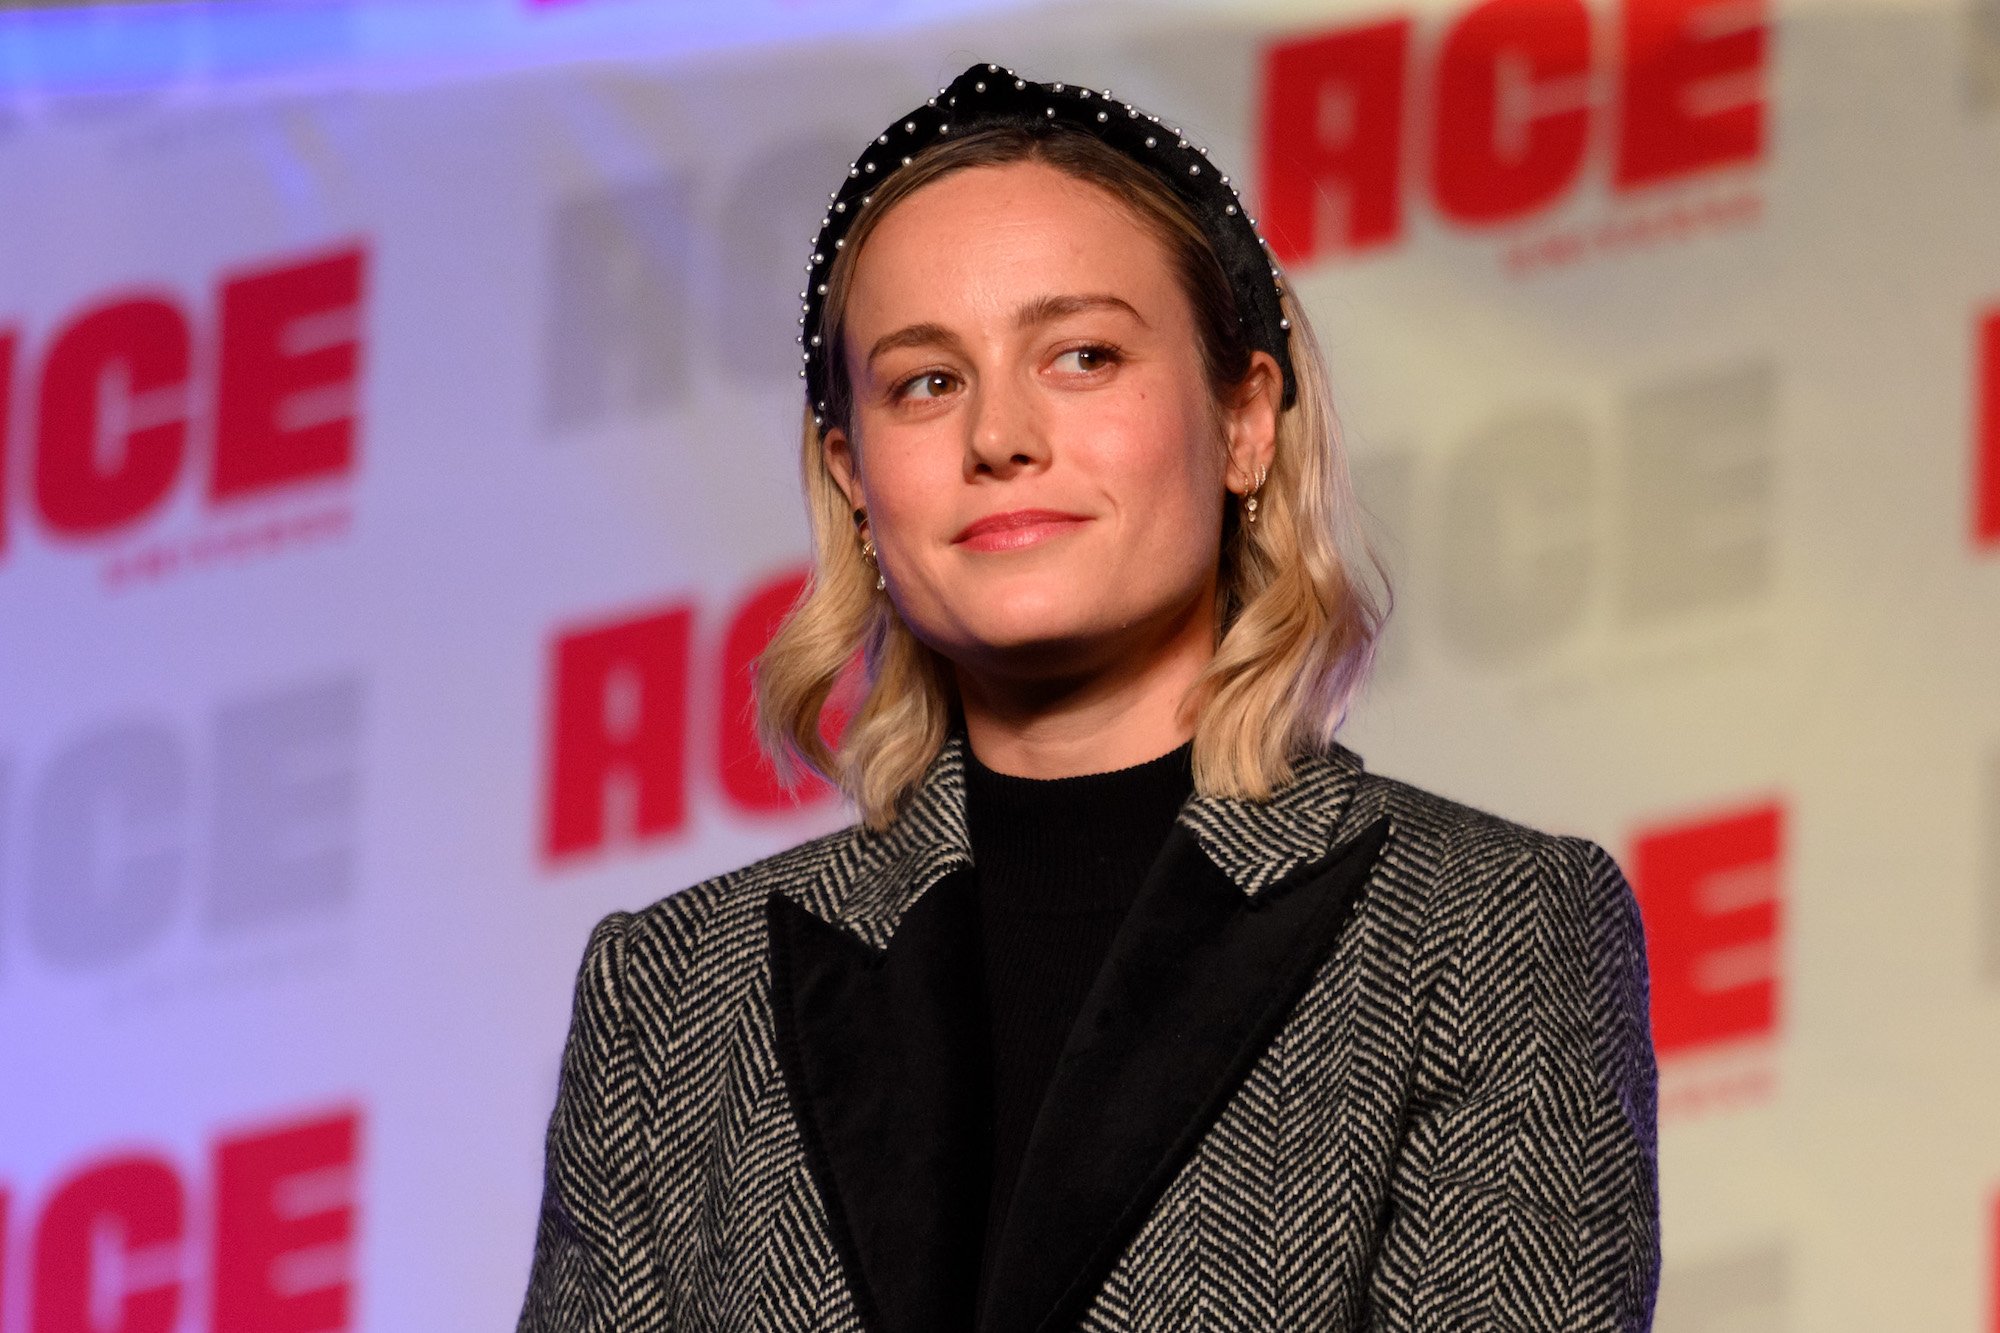 Brie Larson at ACE Comic Con Midwest on October 12, 2019 in Rosemont, Illinois.